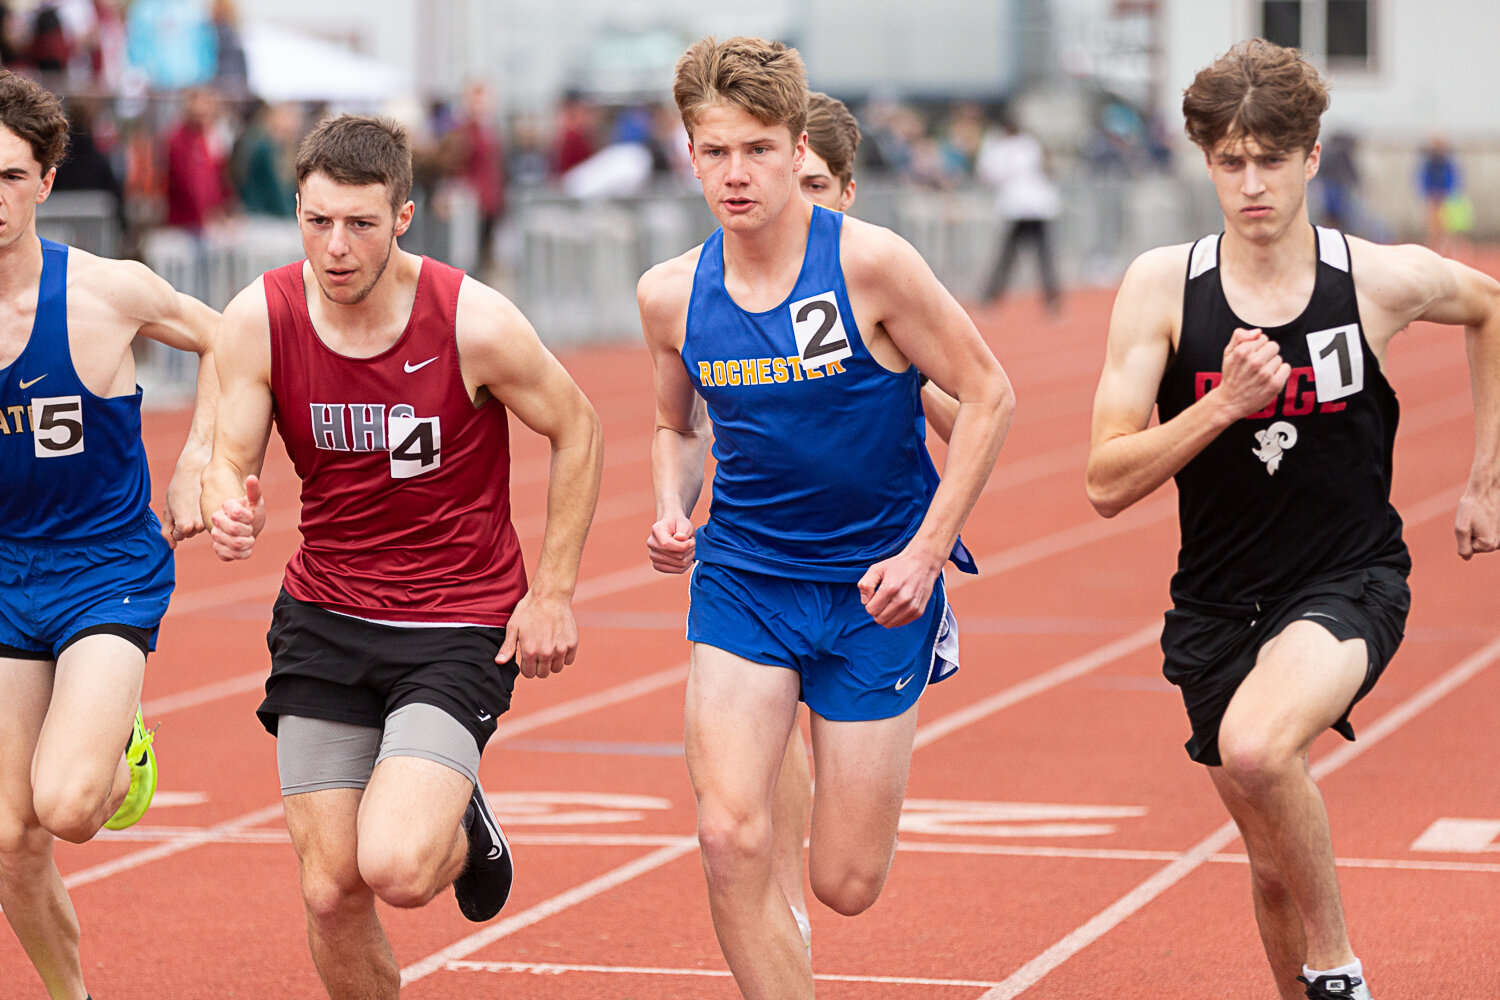 Rochester's Gunnar Morgan competes in the 1600 meters at the Chehalis Activators Classic April 22 at W.F. West.